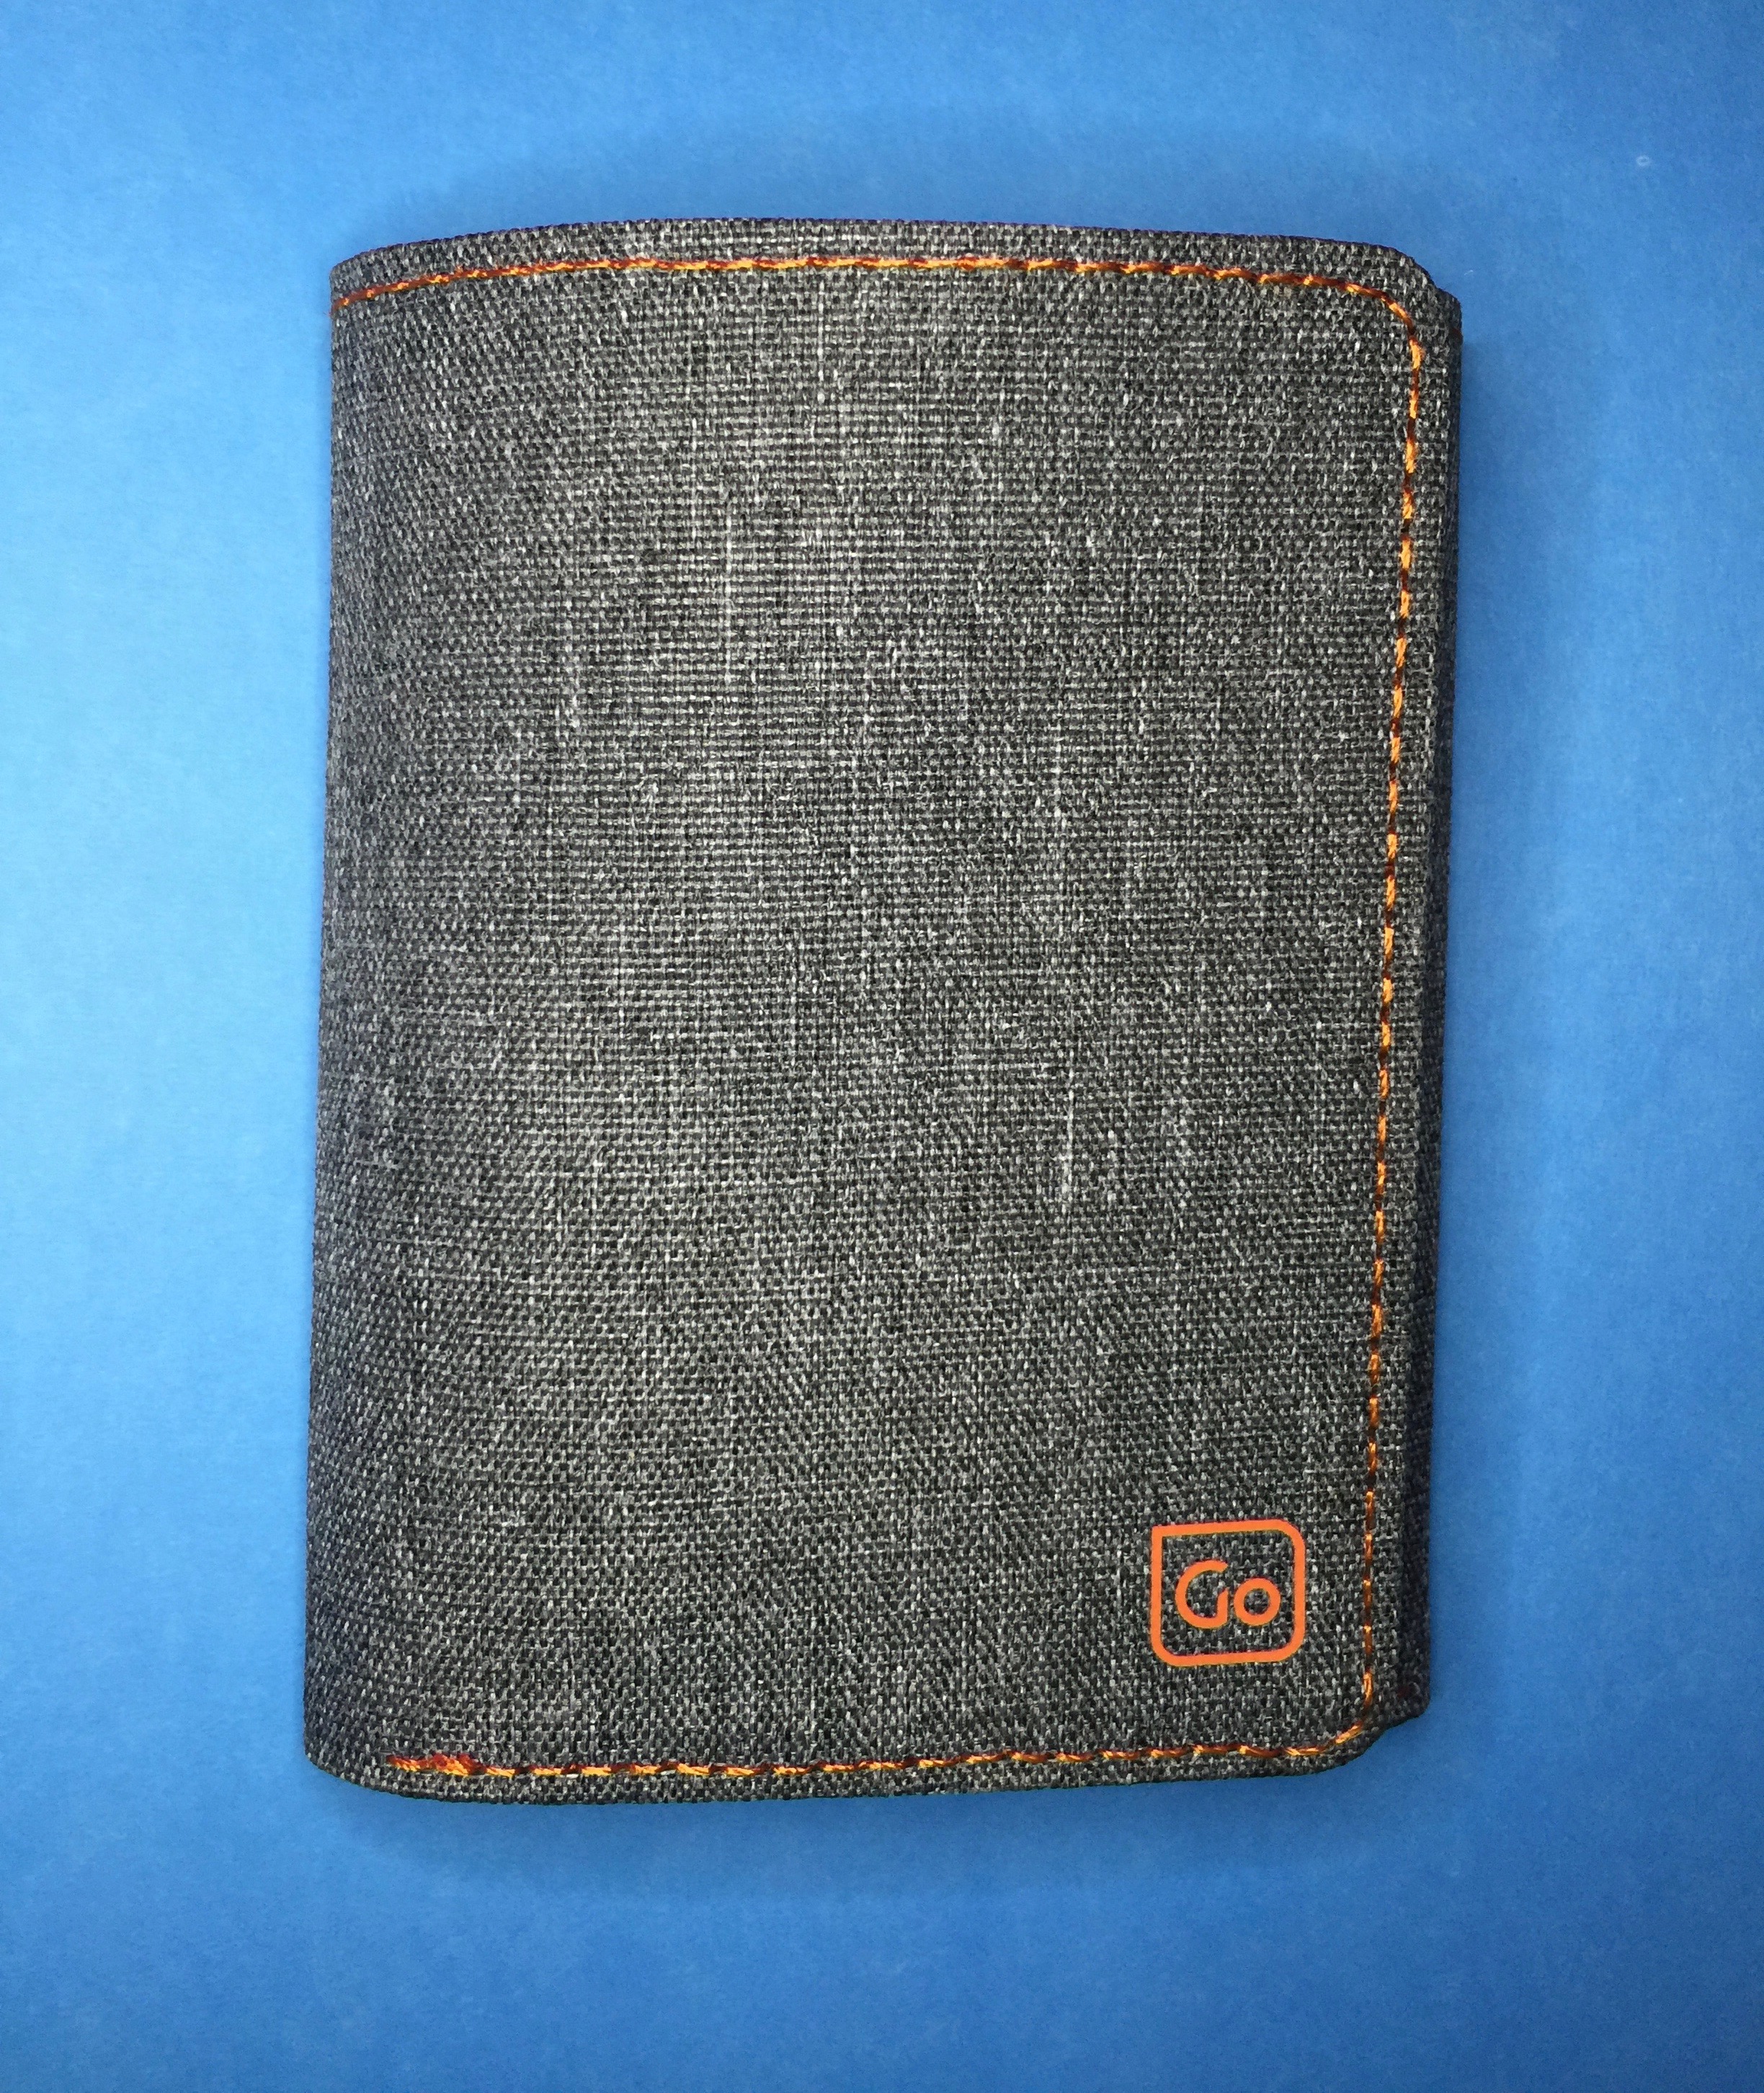 Wallets With RFID Protection – The perfect travel gift